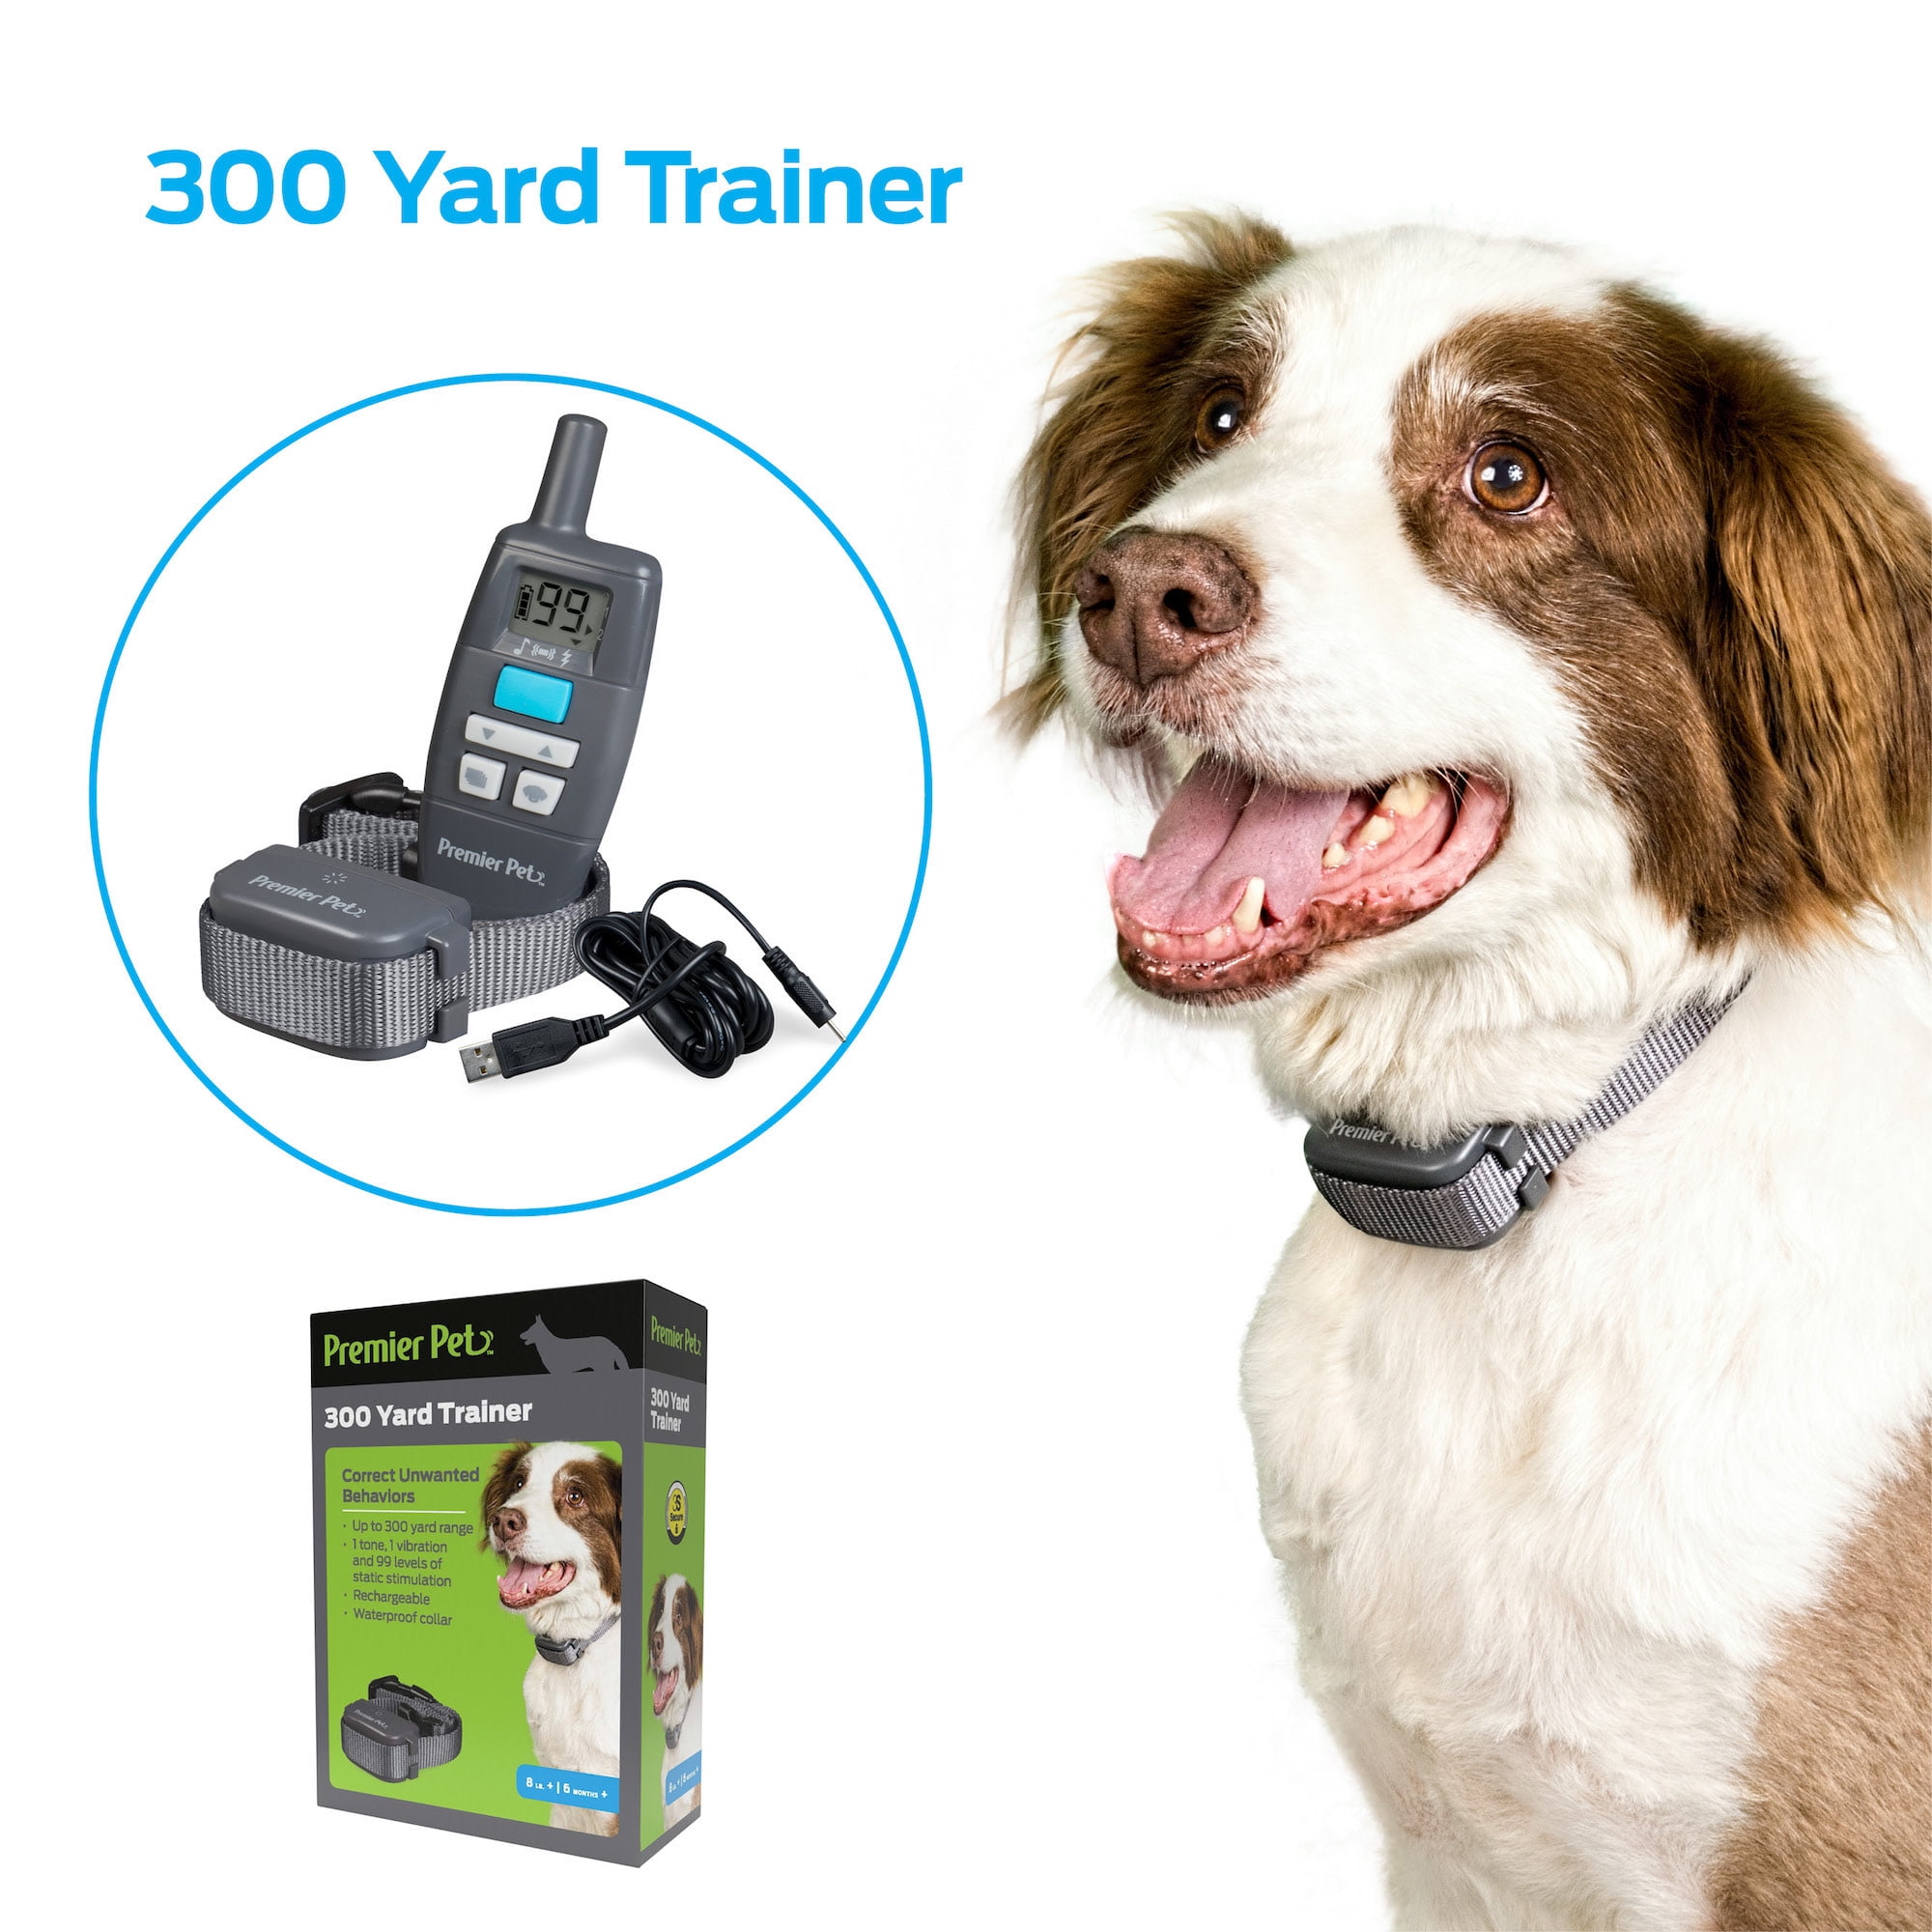 Details about   Dog Training Collar Shock Remote Waterproof Rechargeable 330 Yard Pet Large New 